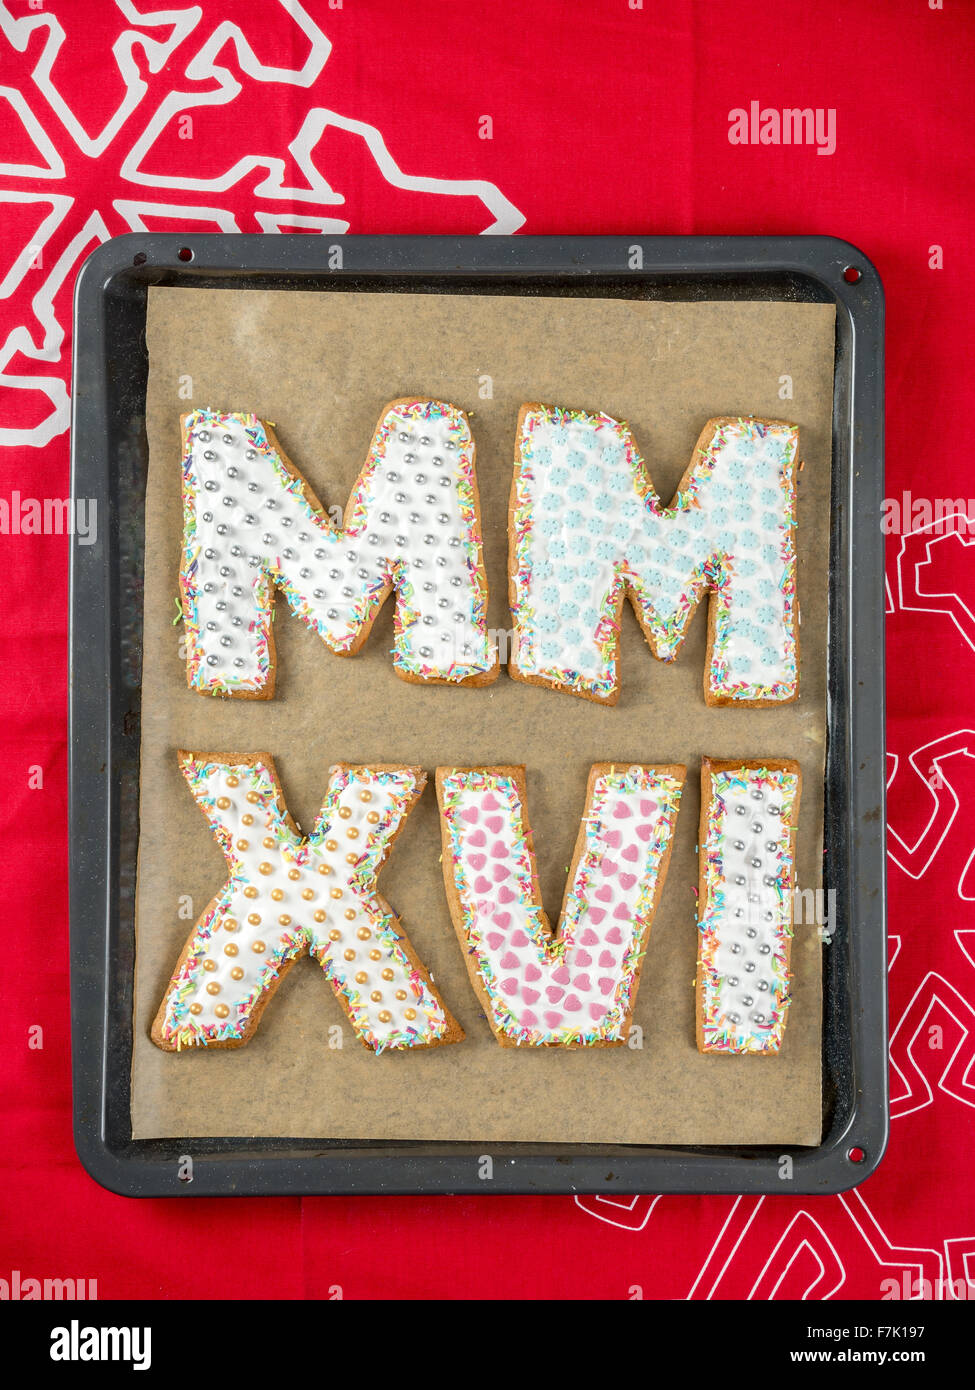 Home-made gingerbread cookies in shape of Roman numerals representing 2016 New Year date on baking tray Stock Photo